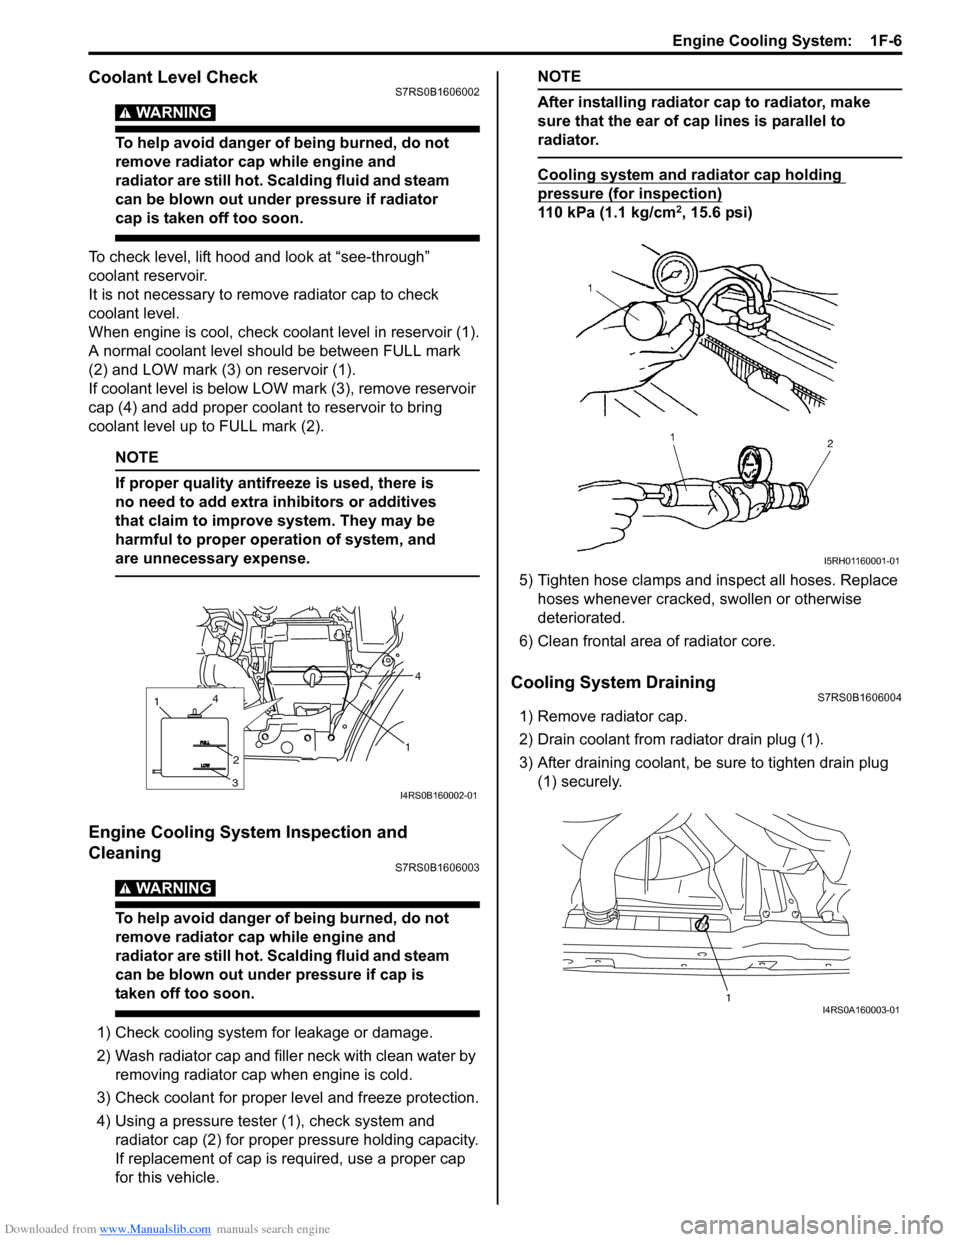 SUZUKI SWIFT 2005 2.G Service Workshop Manual Downloaded from www.Manualslib.com manuals search engine Engine Cooling System:  1F-6
Coolant Level CheckS7RS0B1606002
WARNING! 
To help avoid danger of being burned, do not 
remove radiator cap while